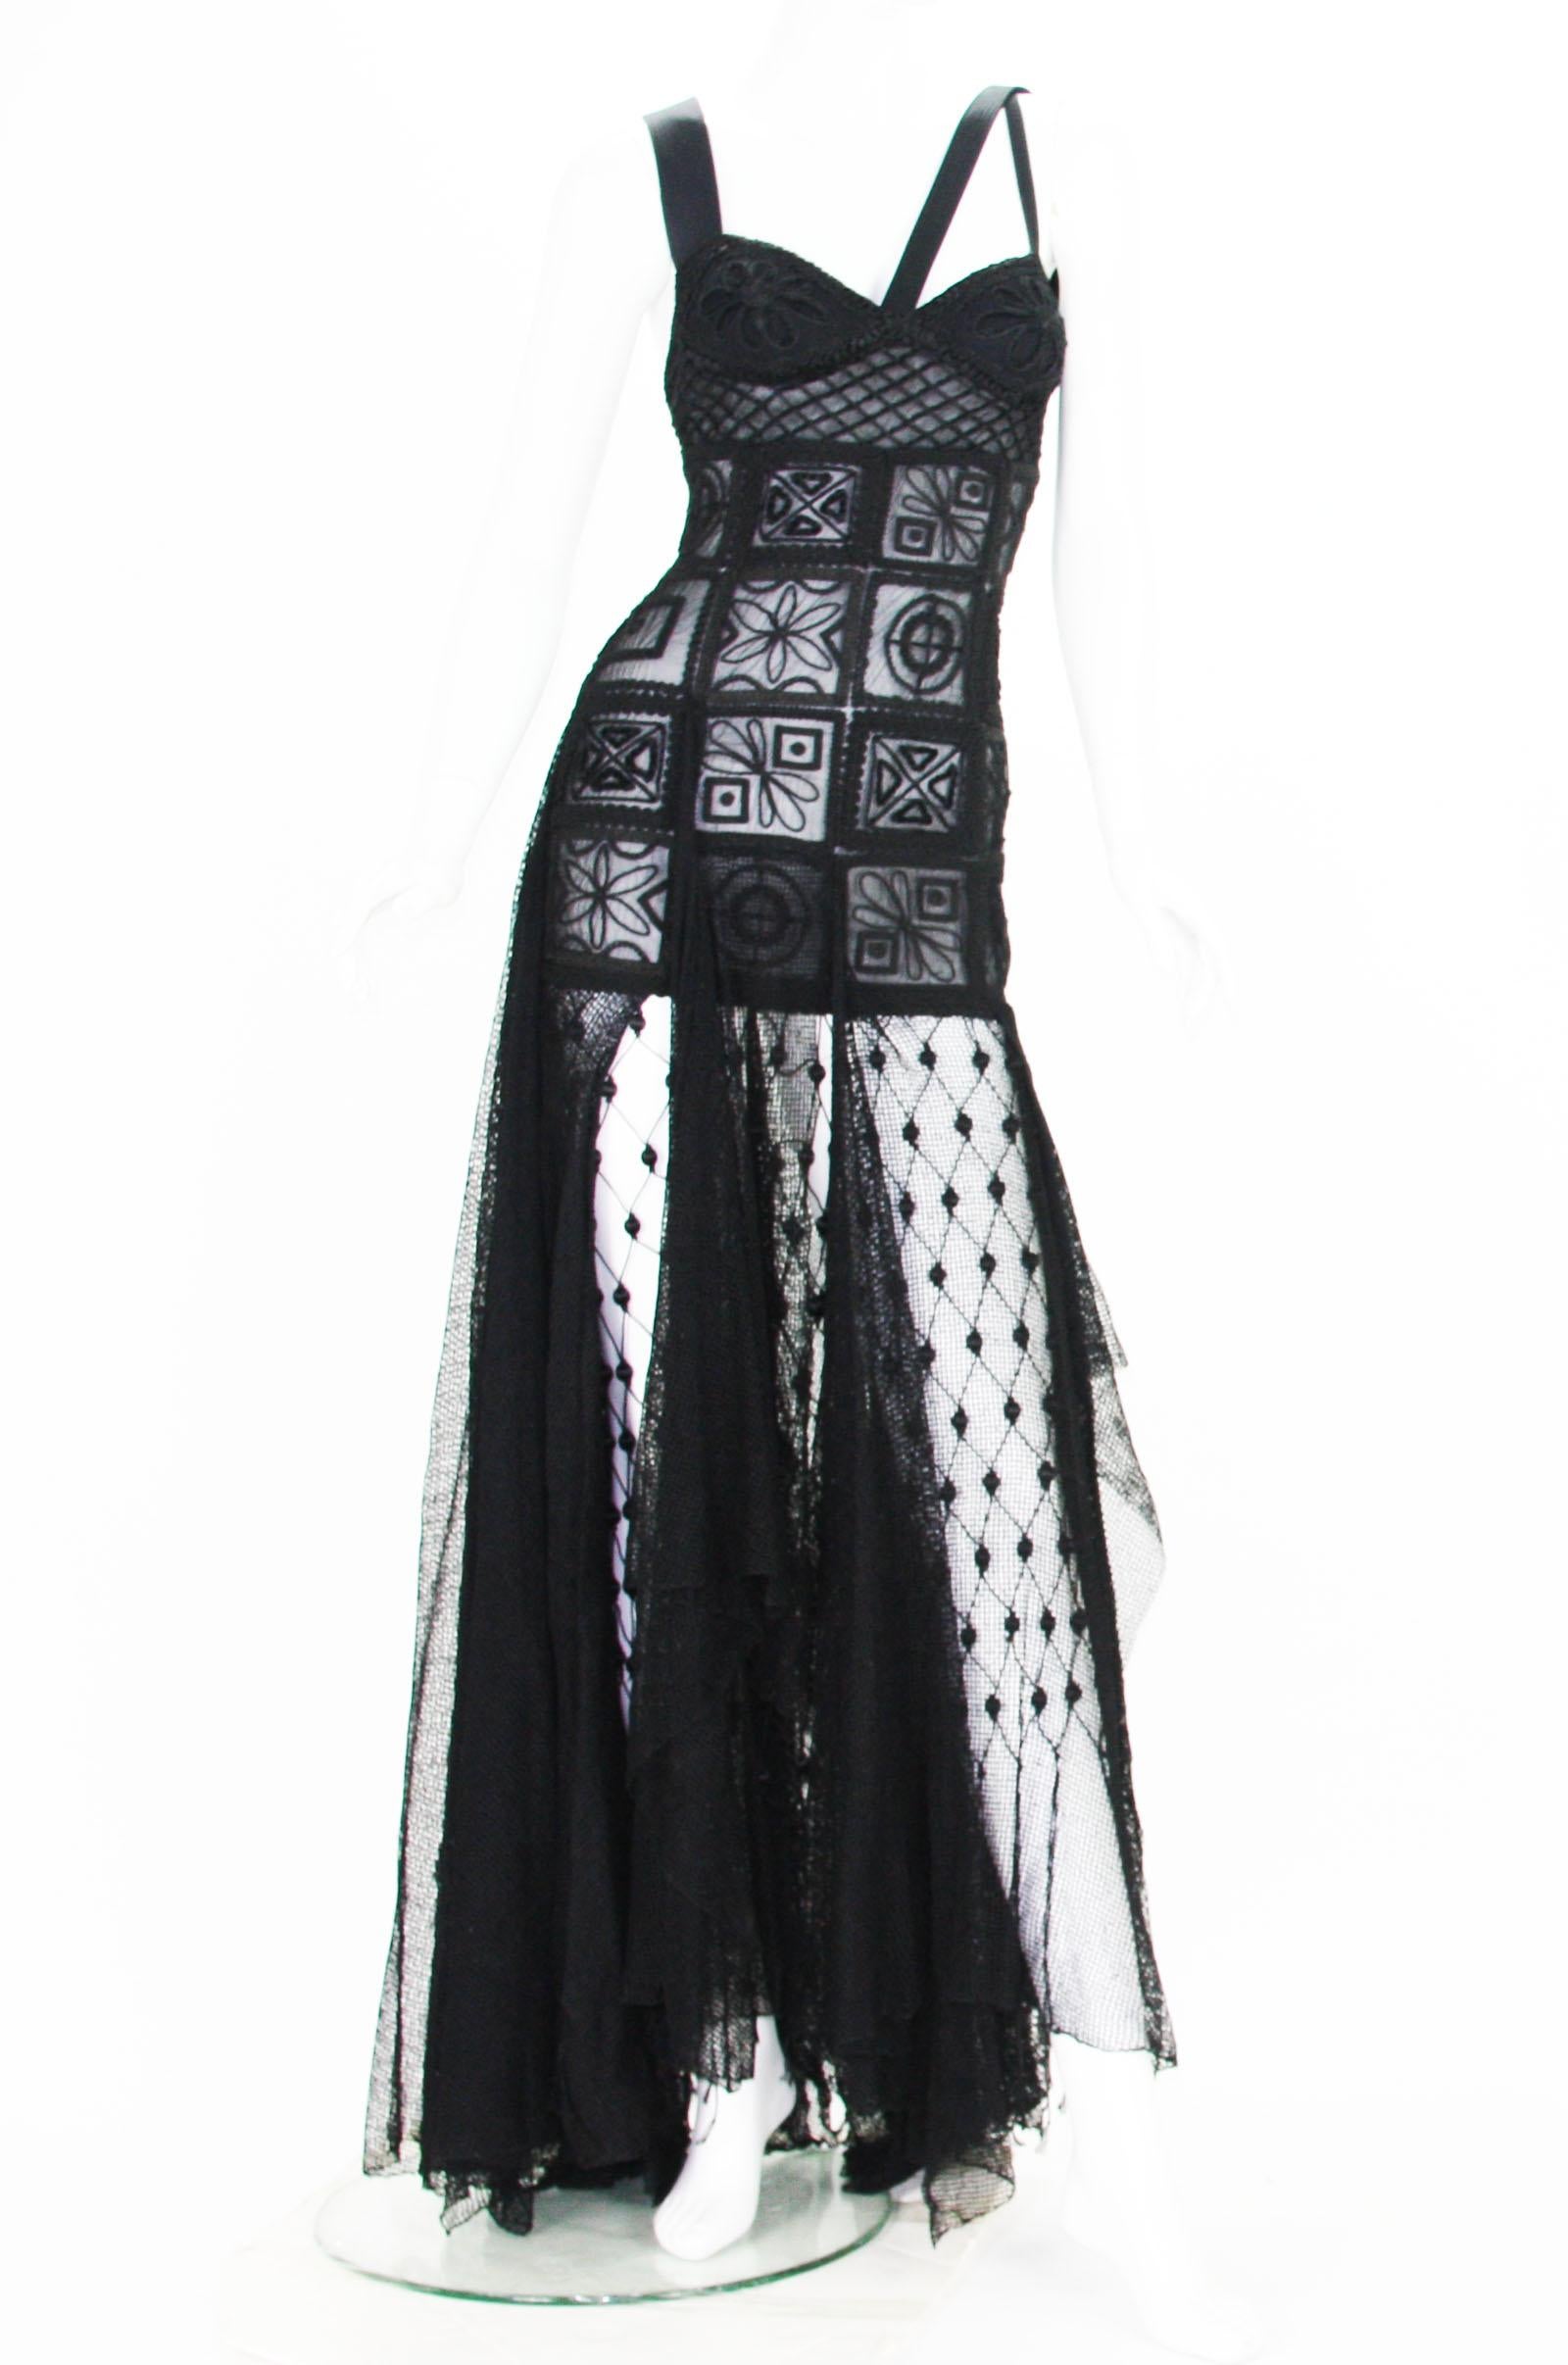 New Atelier Versace F/W 1993 Sheer Black Net Embroidered Dress Gown 2